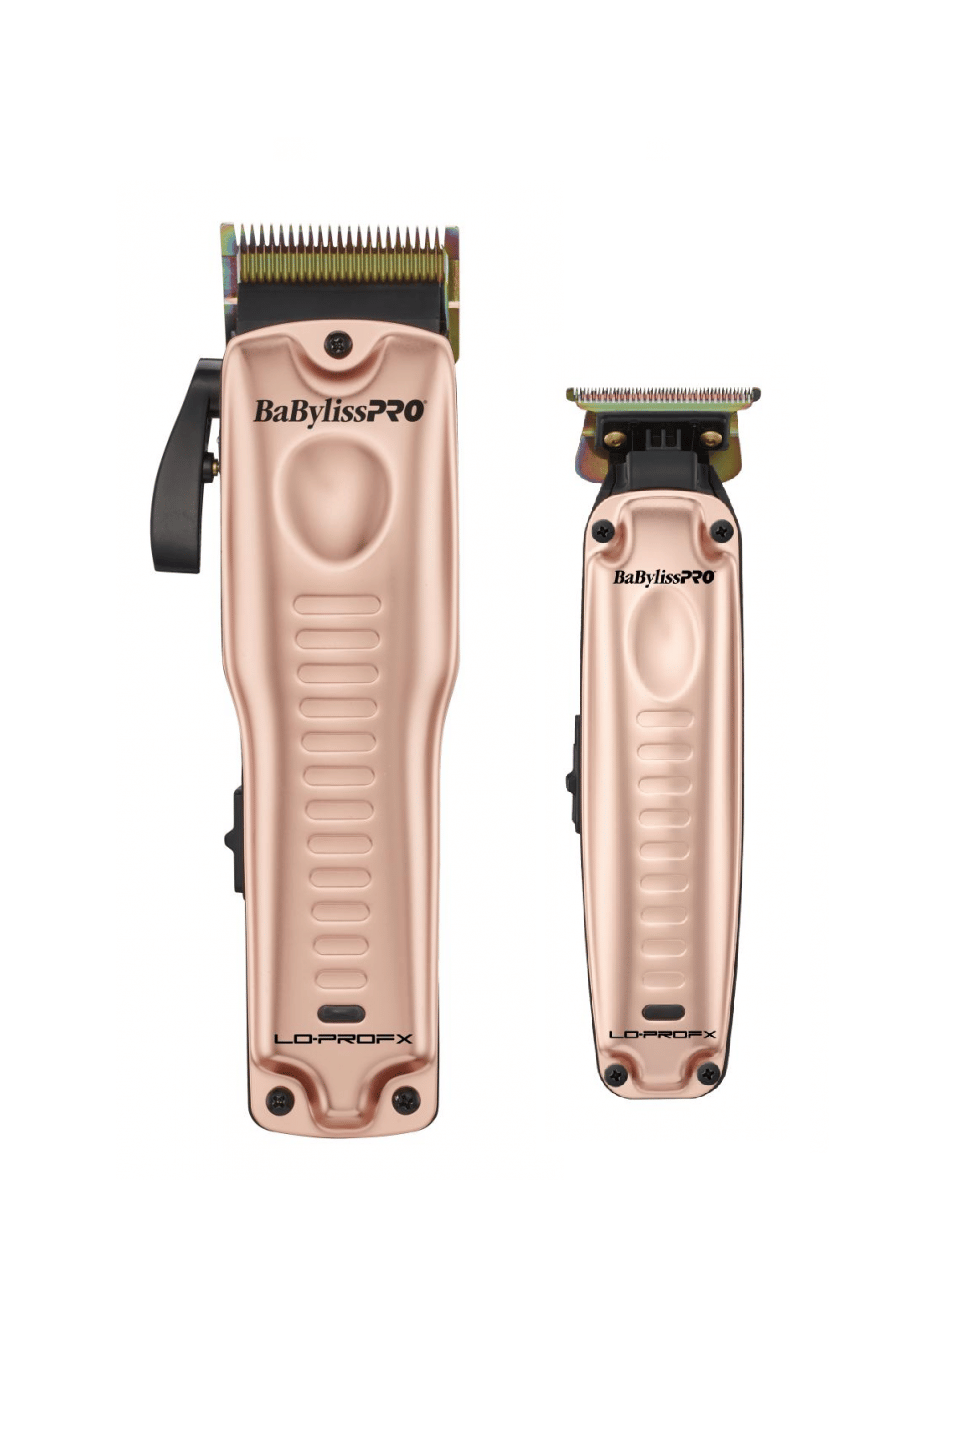 Tomb 45 Babyliss Performance Motor for Babyliss FX Clipper